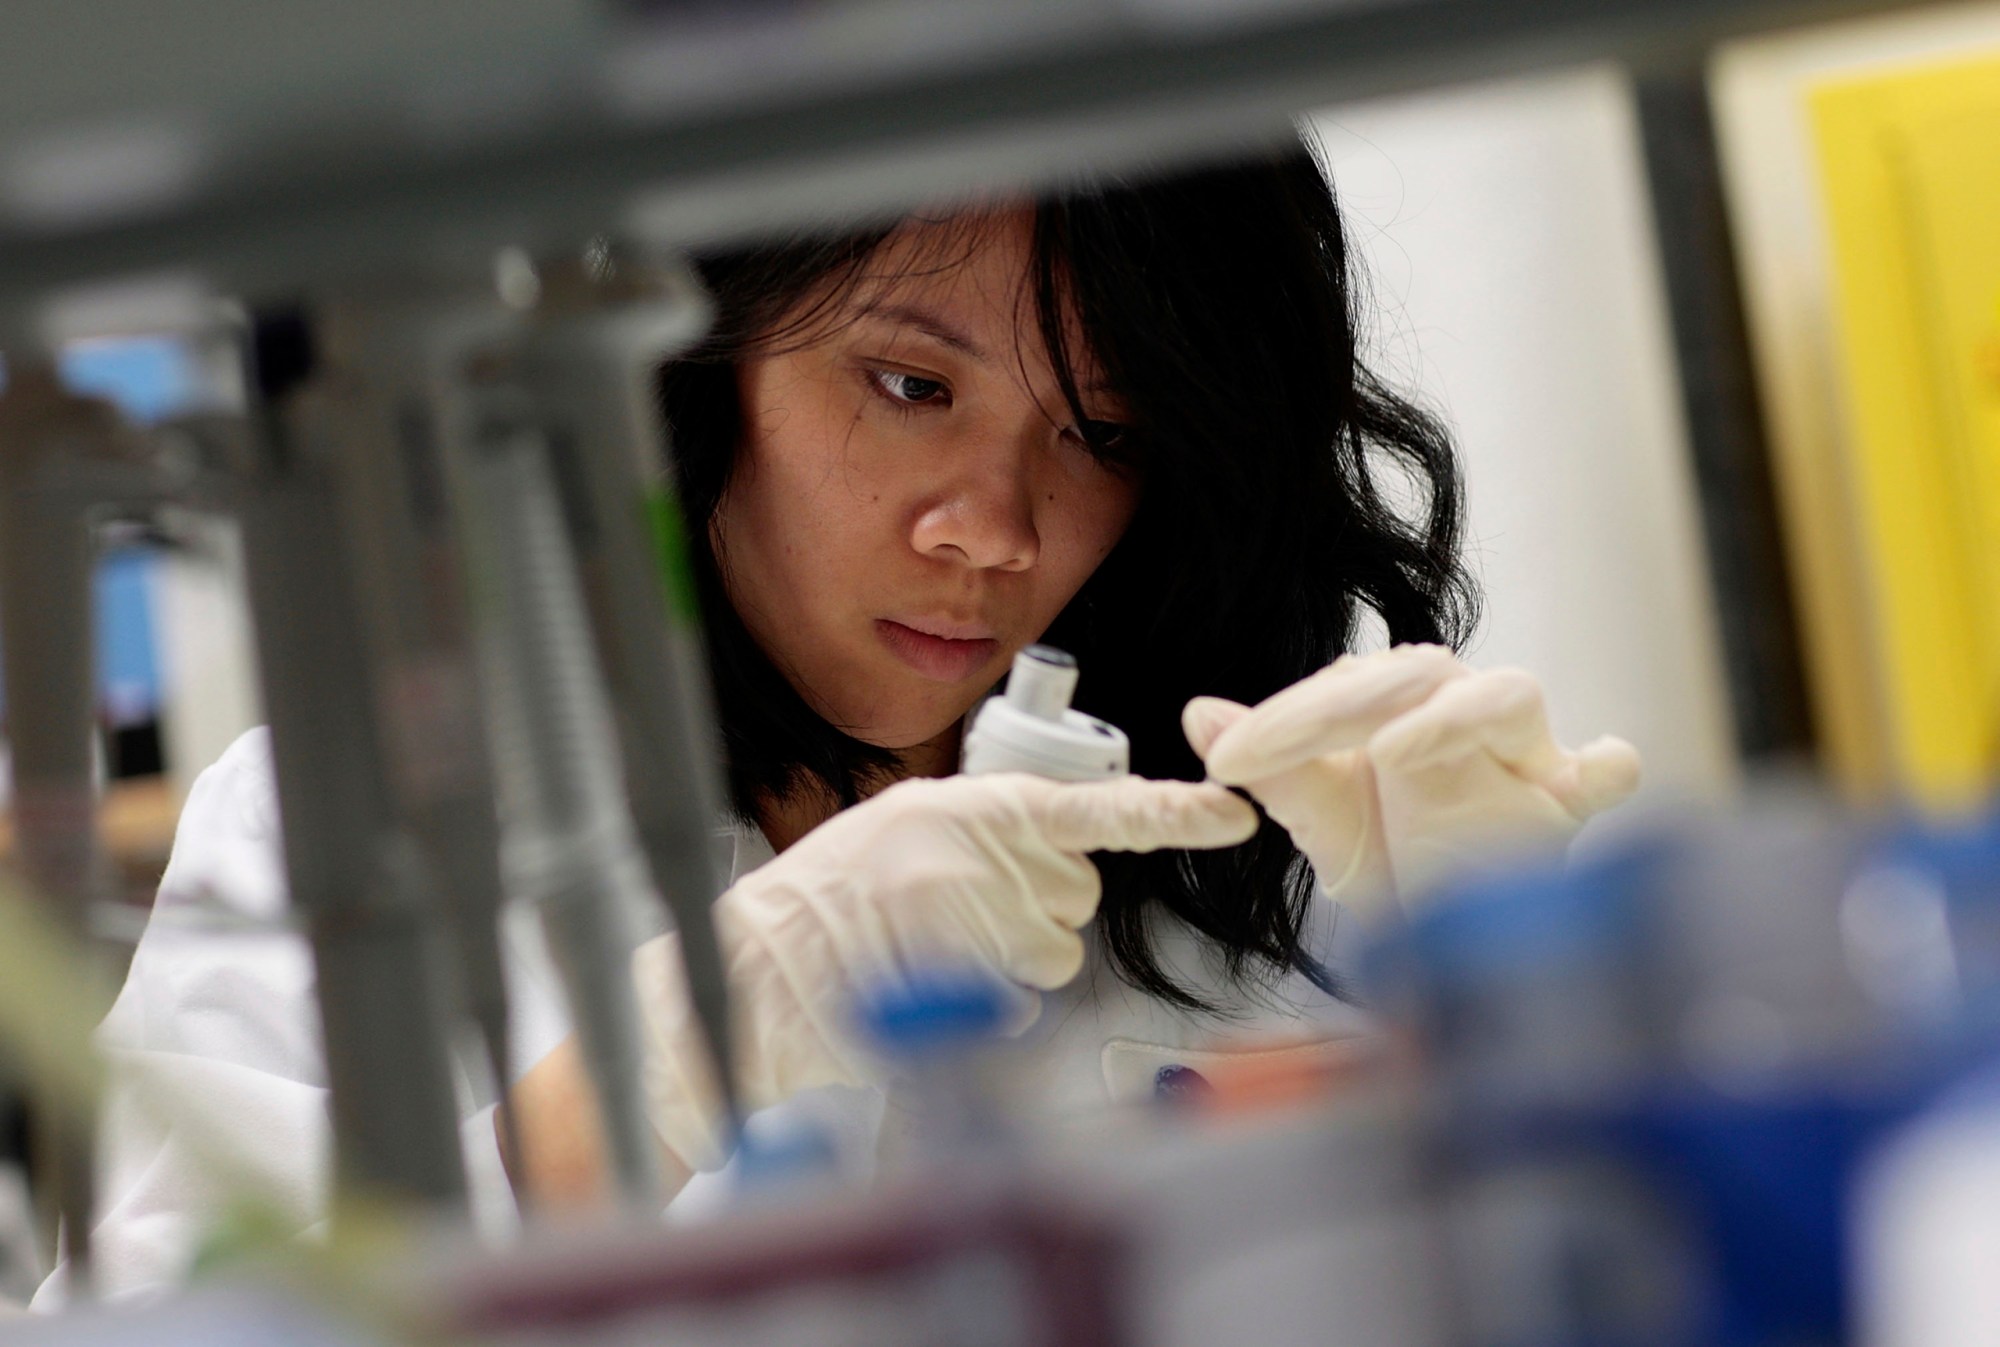 Hanh Nguyen, an intern with the Immunogen Design Group, works at the AIDS Vaccine Design and Development Laboratory in New York City. (Chris Hondros)